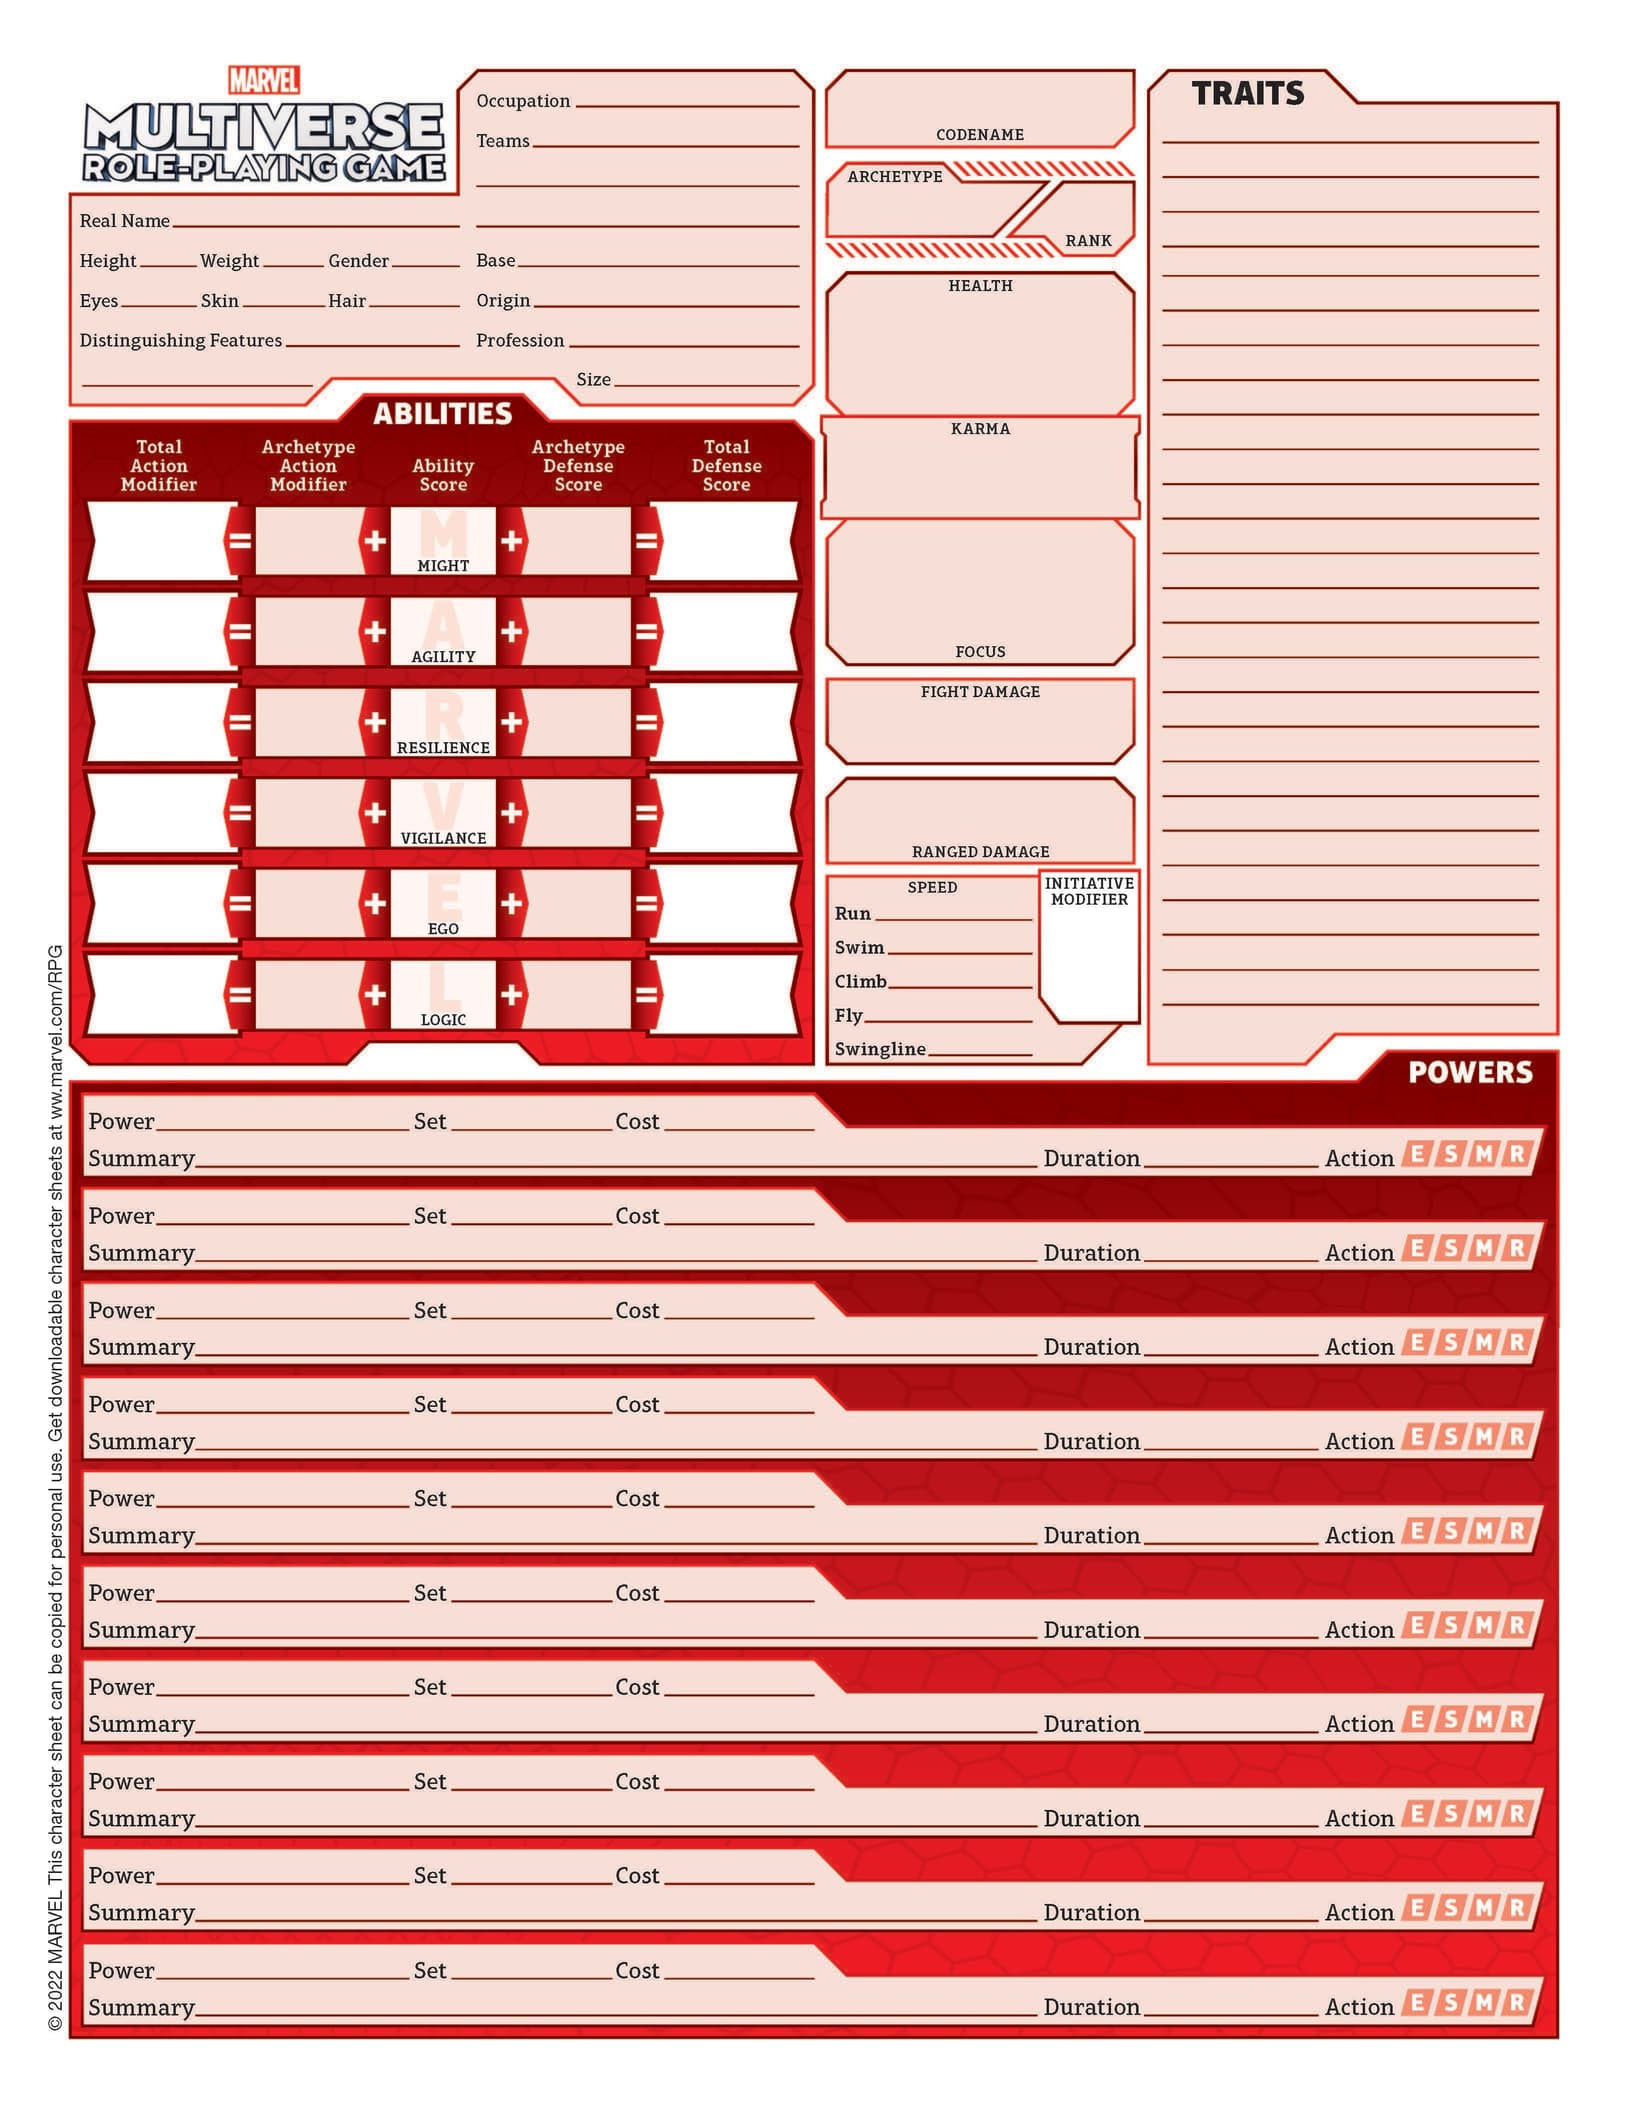 Marvel Multiverse Role-Playing Game Playtest Rulebook by Matt Forbeck Character Sheet (Blank)